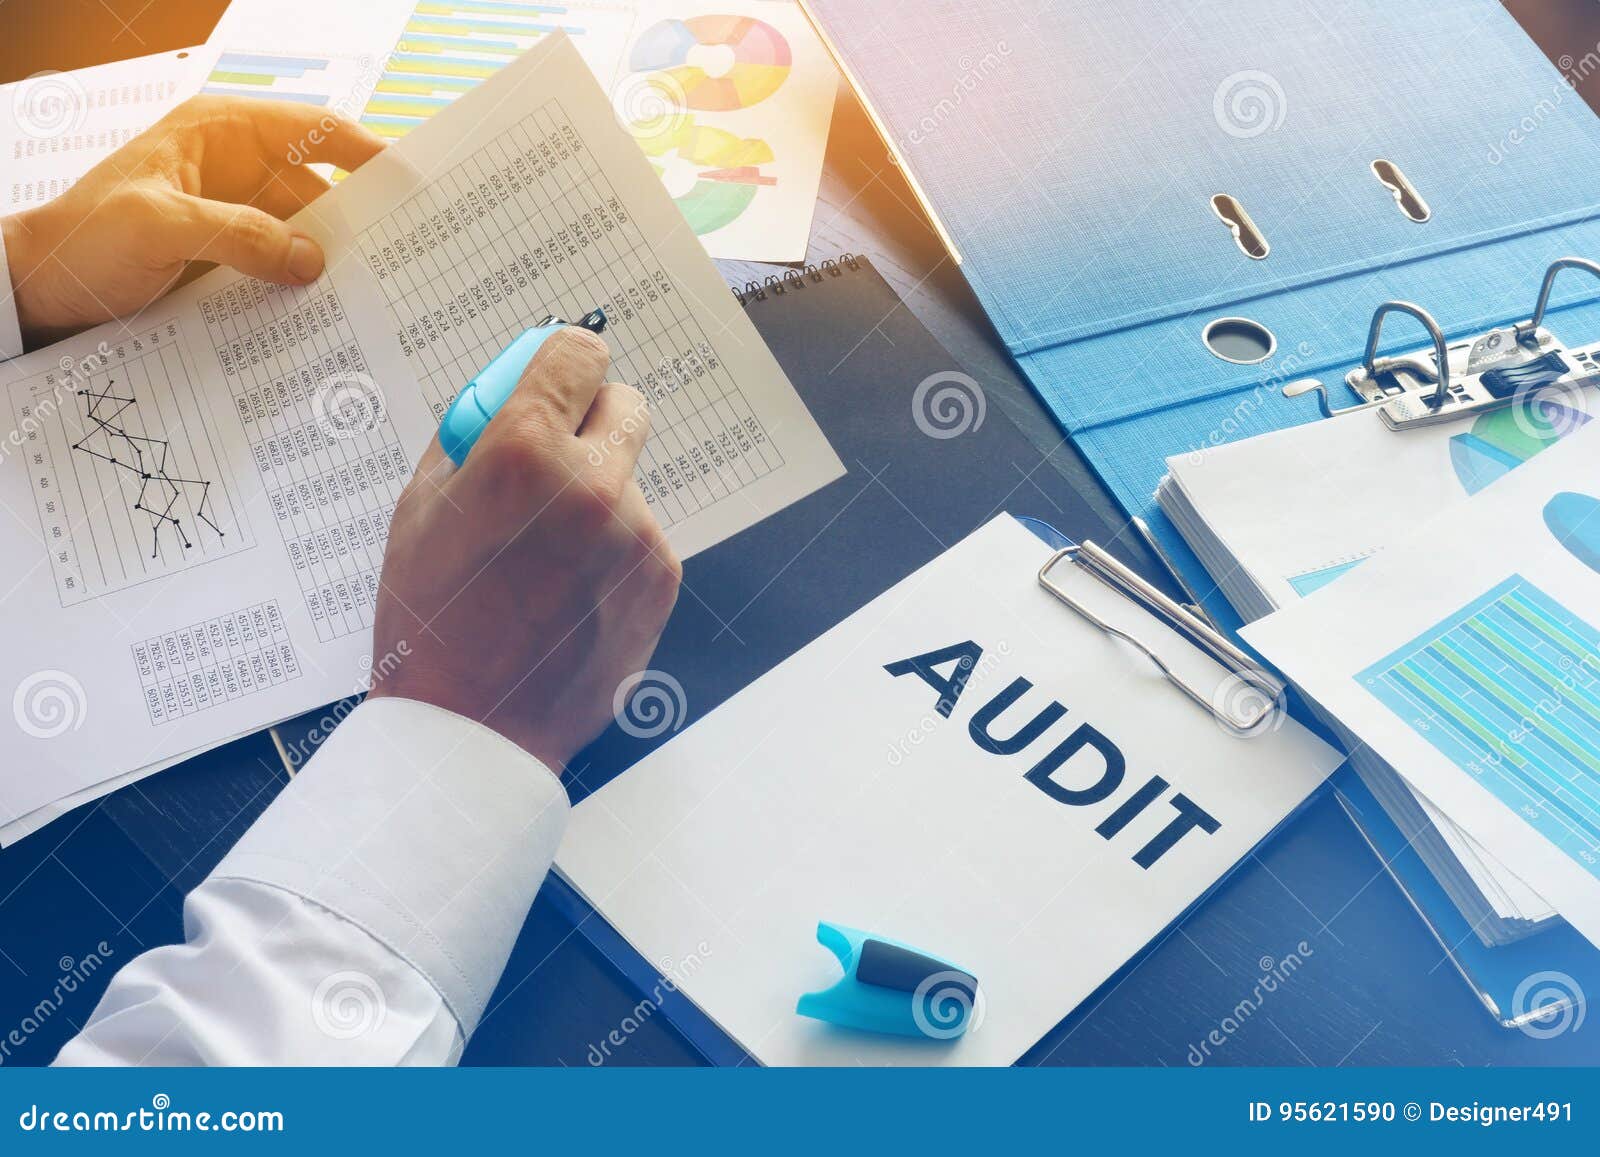 document with title audit.